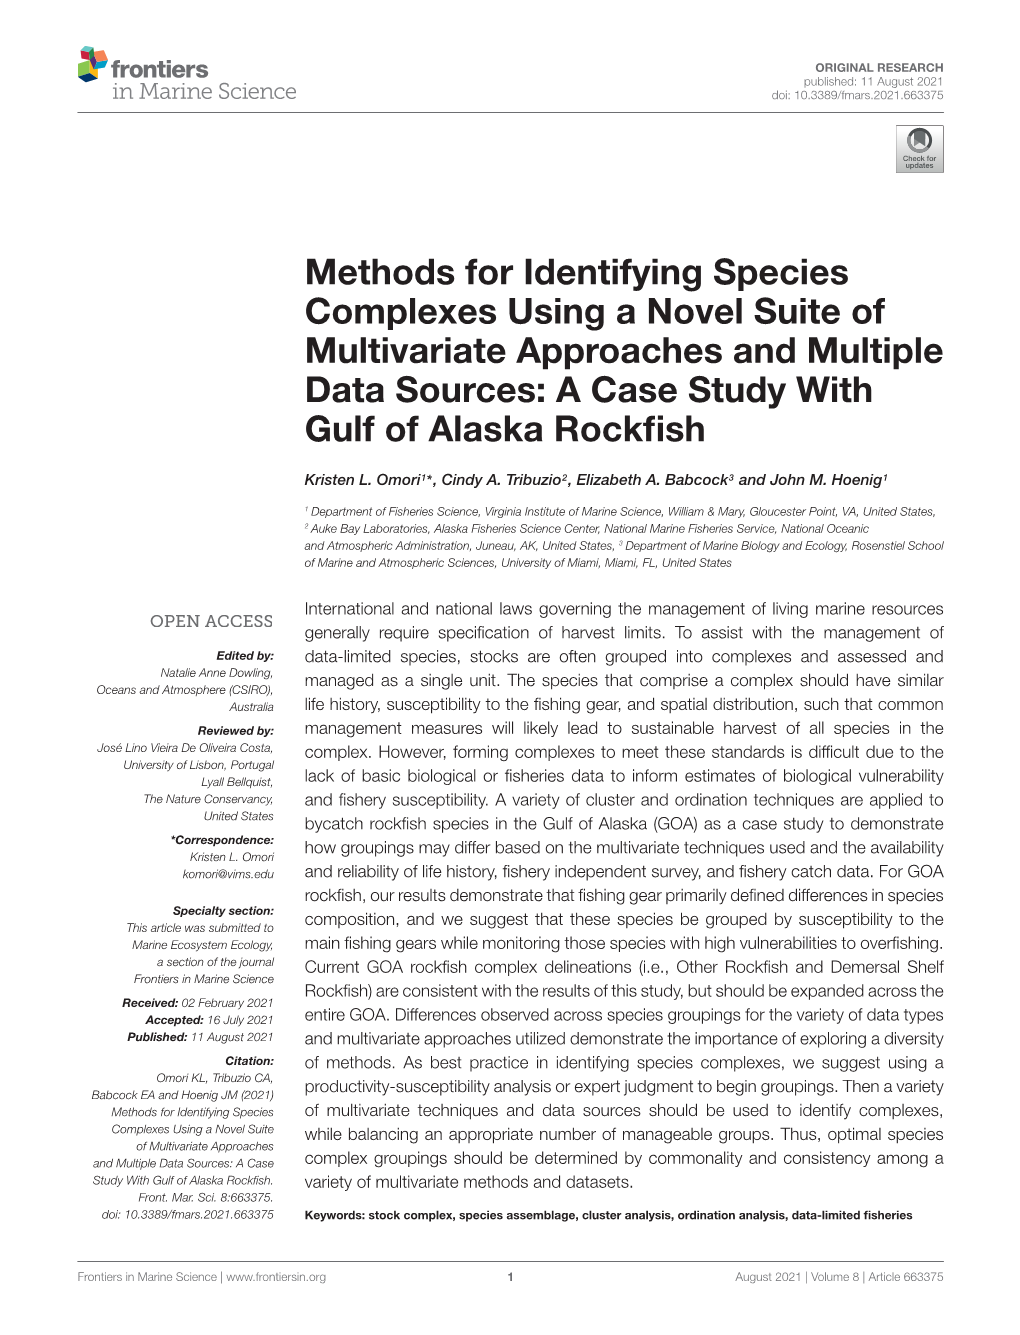 Methods for Identifying Species Complexes Using a Novel Suite of Multivariate Approaches and Multiple Data Sources: a Case Study with Gulf of Alaska Rockﬁsh